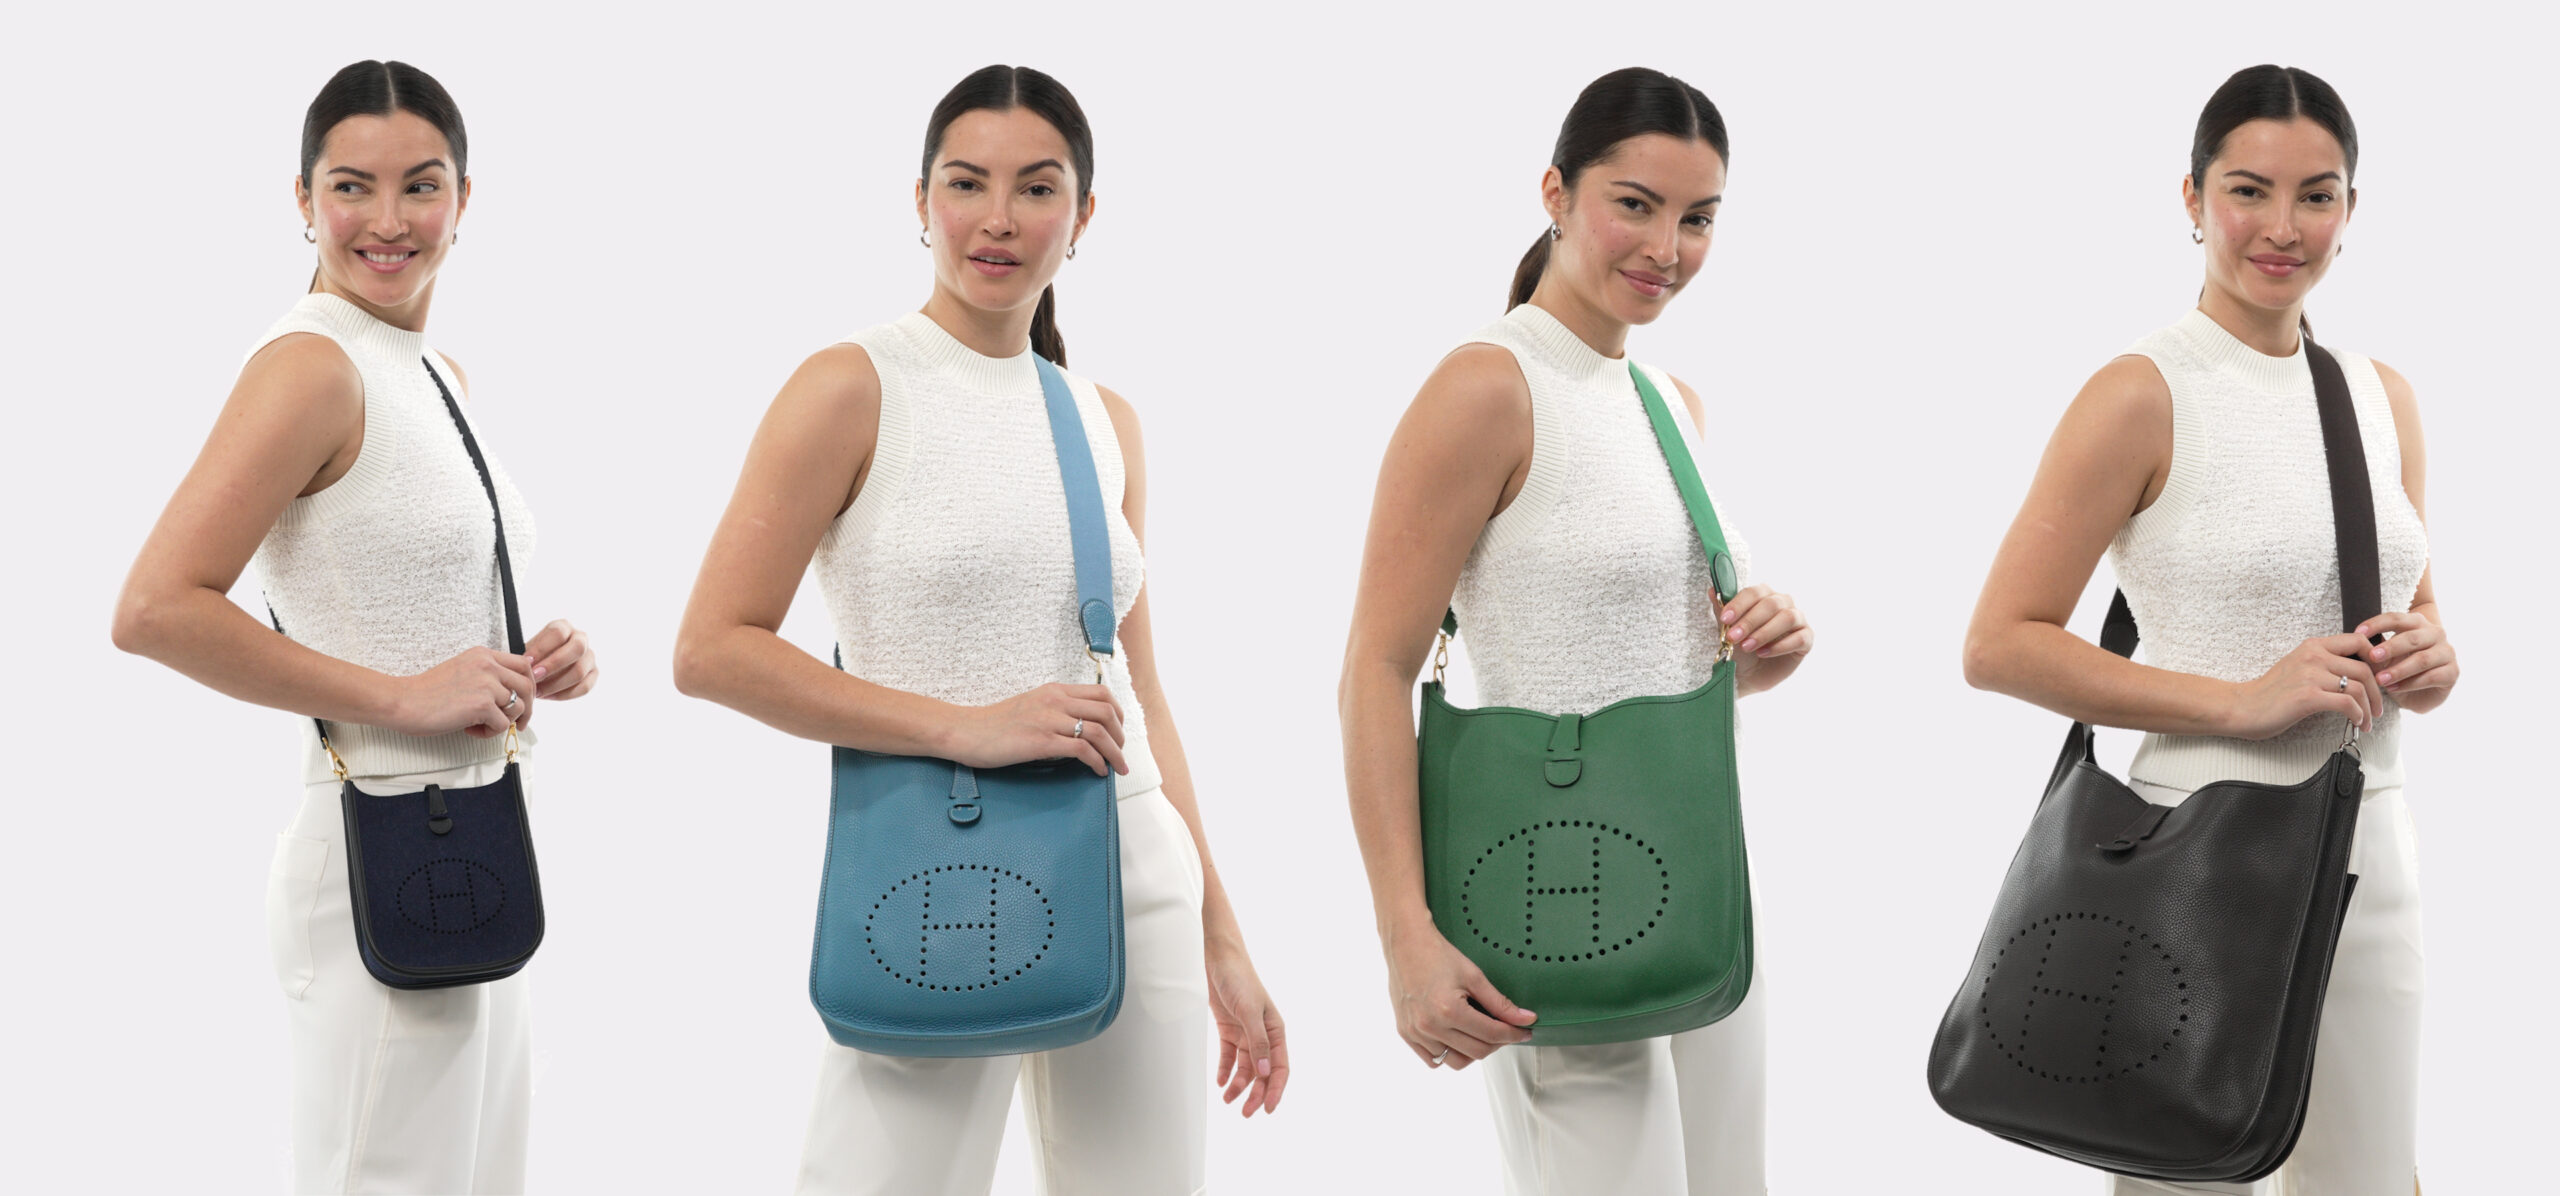 The Ultimate Size Guide for the Hermès Evelyne